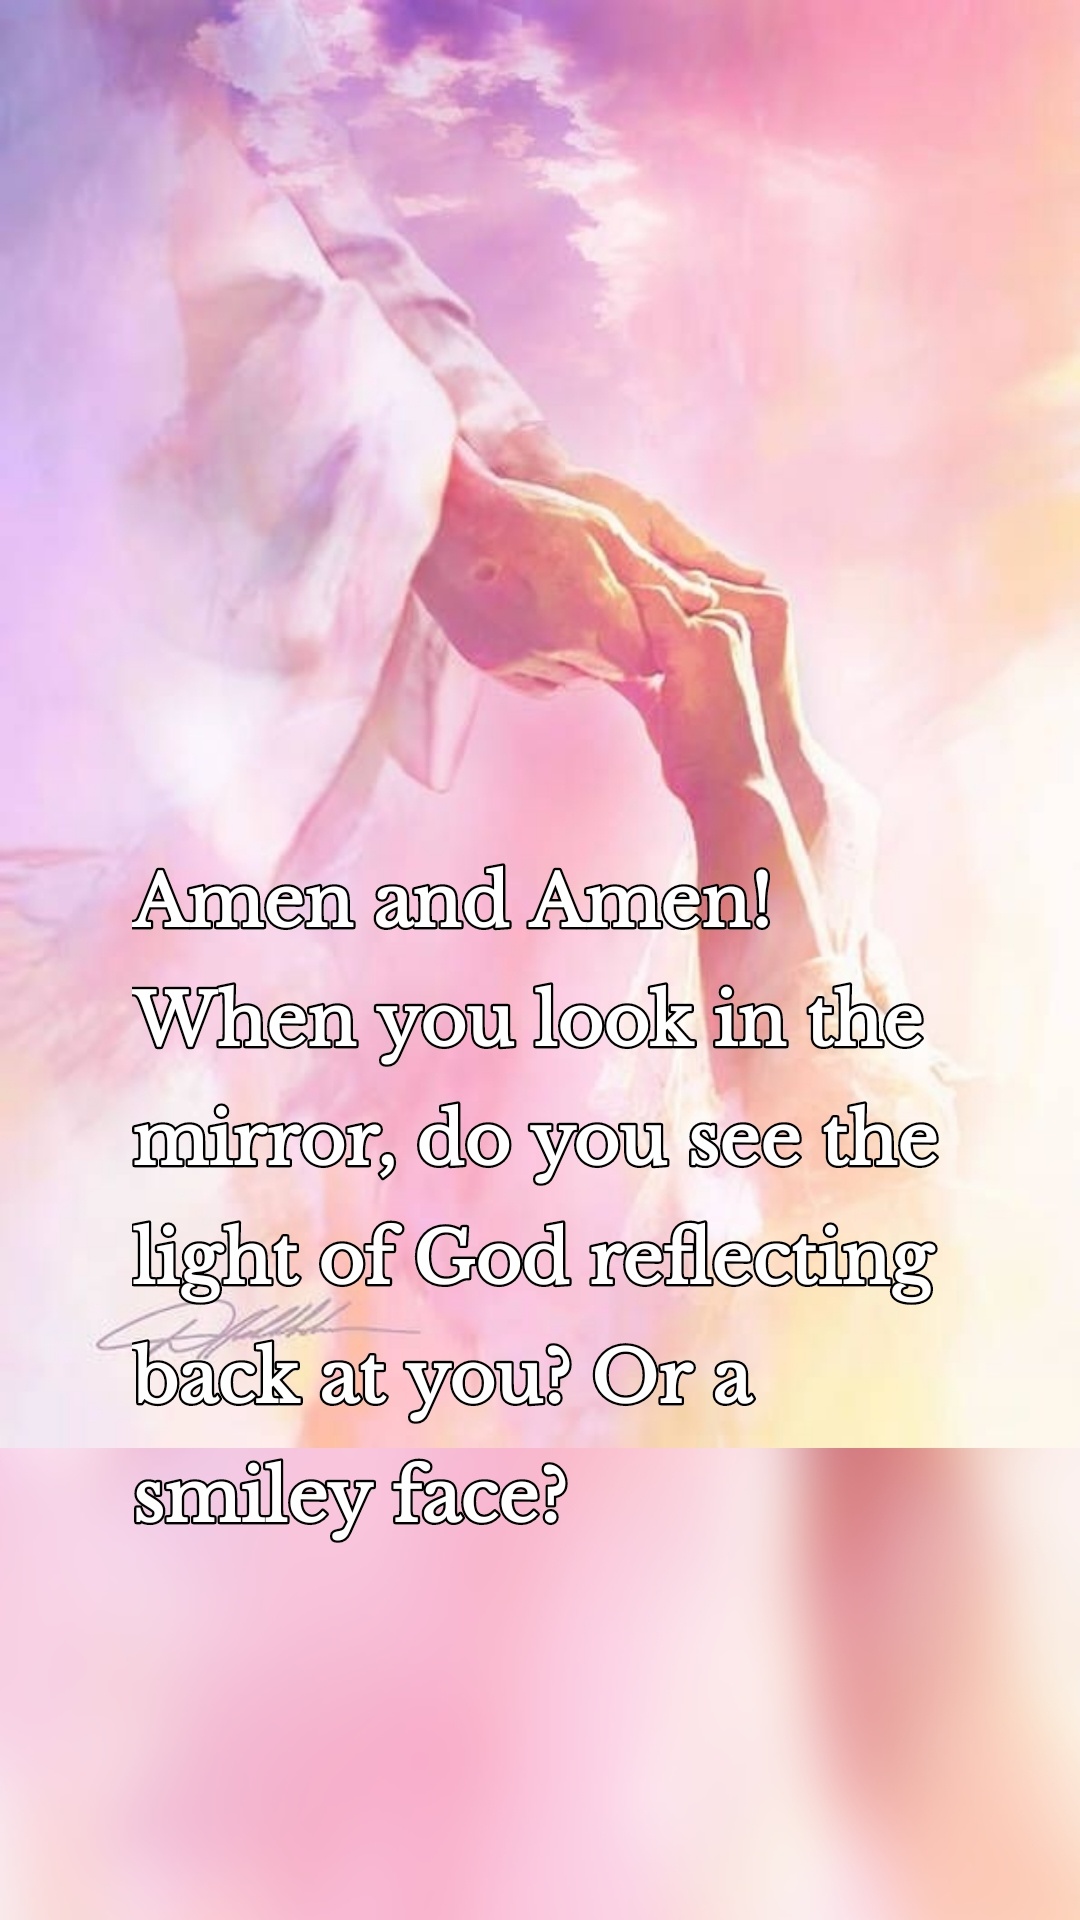 Amen and Amen! When you look in the mirror, do you see the light of God reflecting back at you? Or a smiley face? 